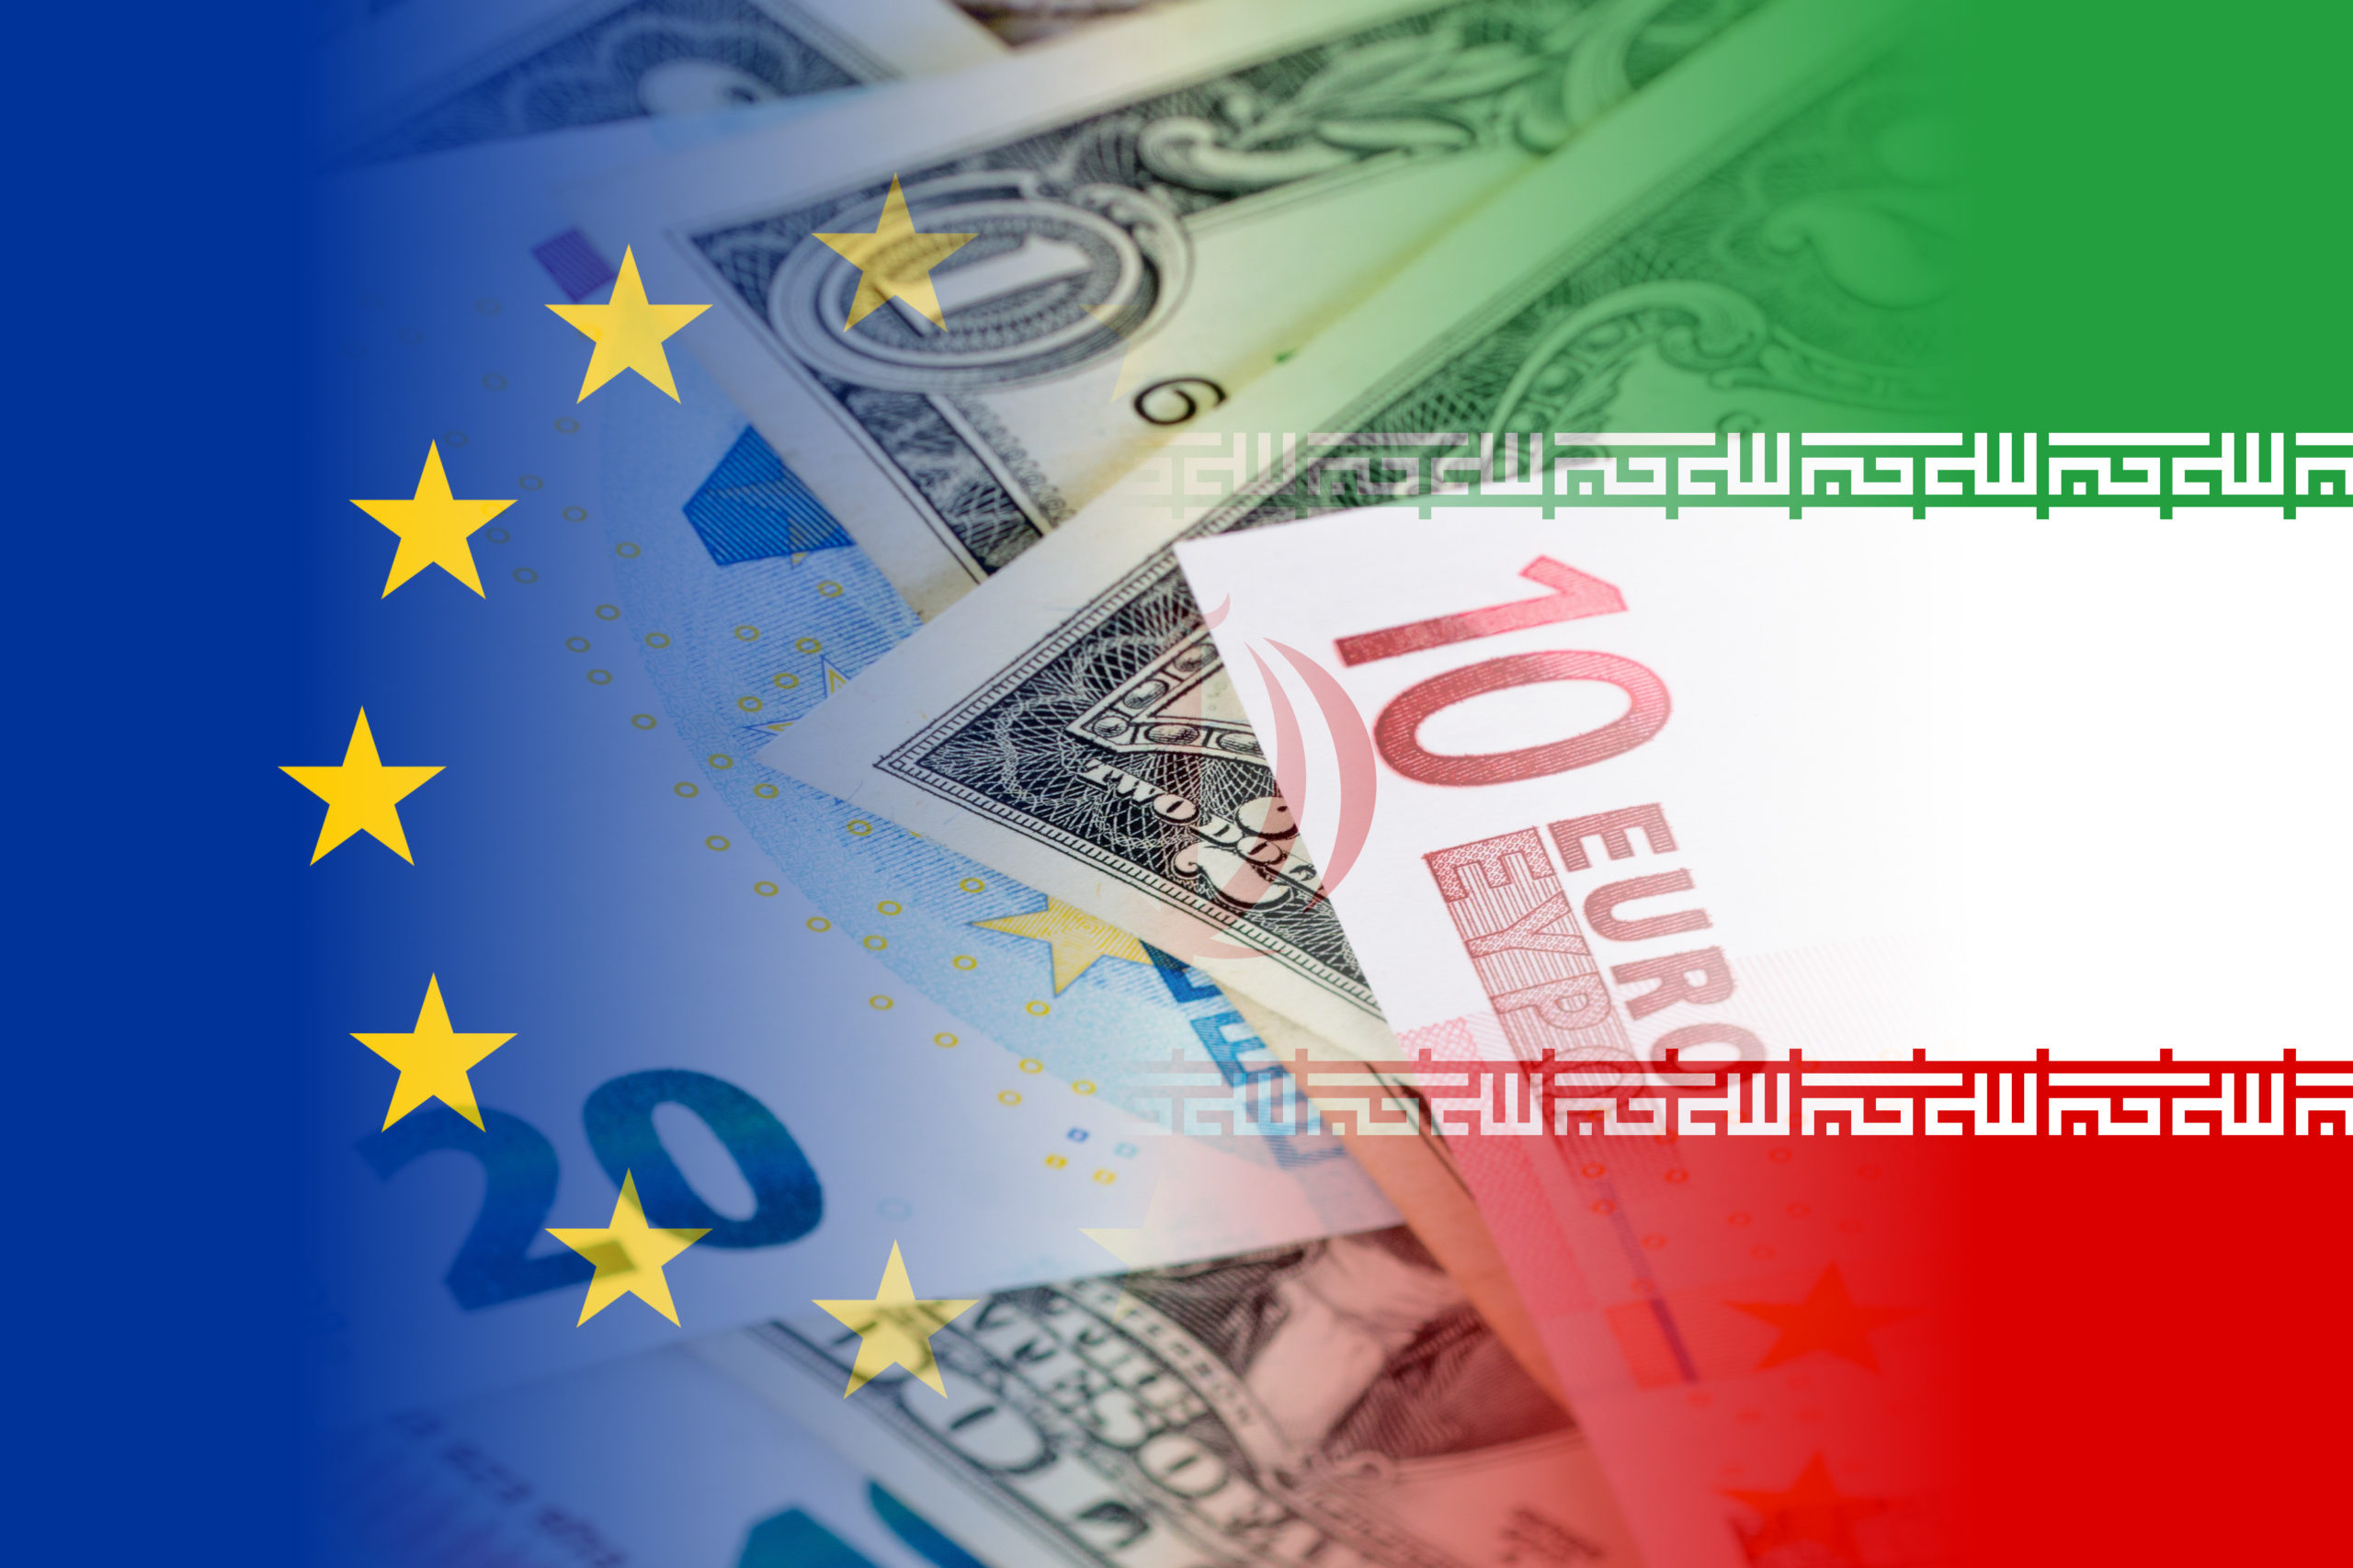 Iran, the EU, and the USA: The European Search for (Some Degree of) Autonomy